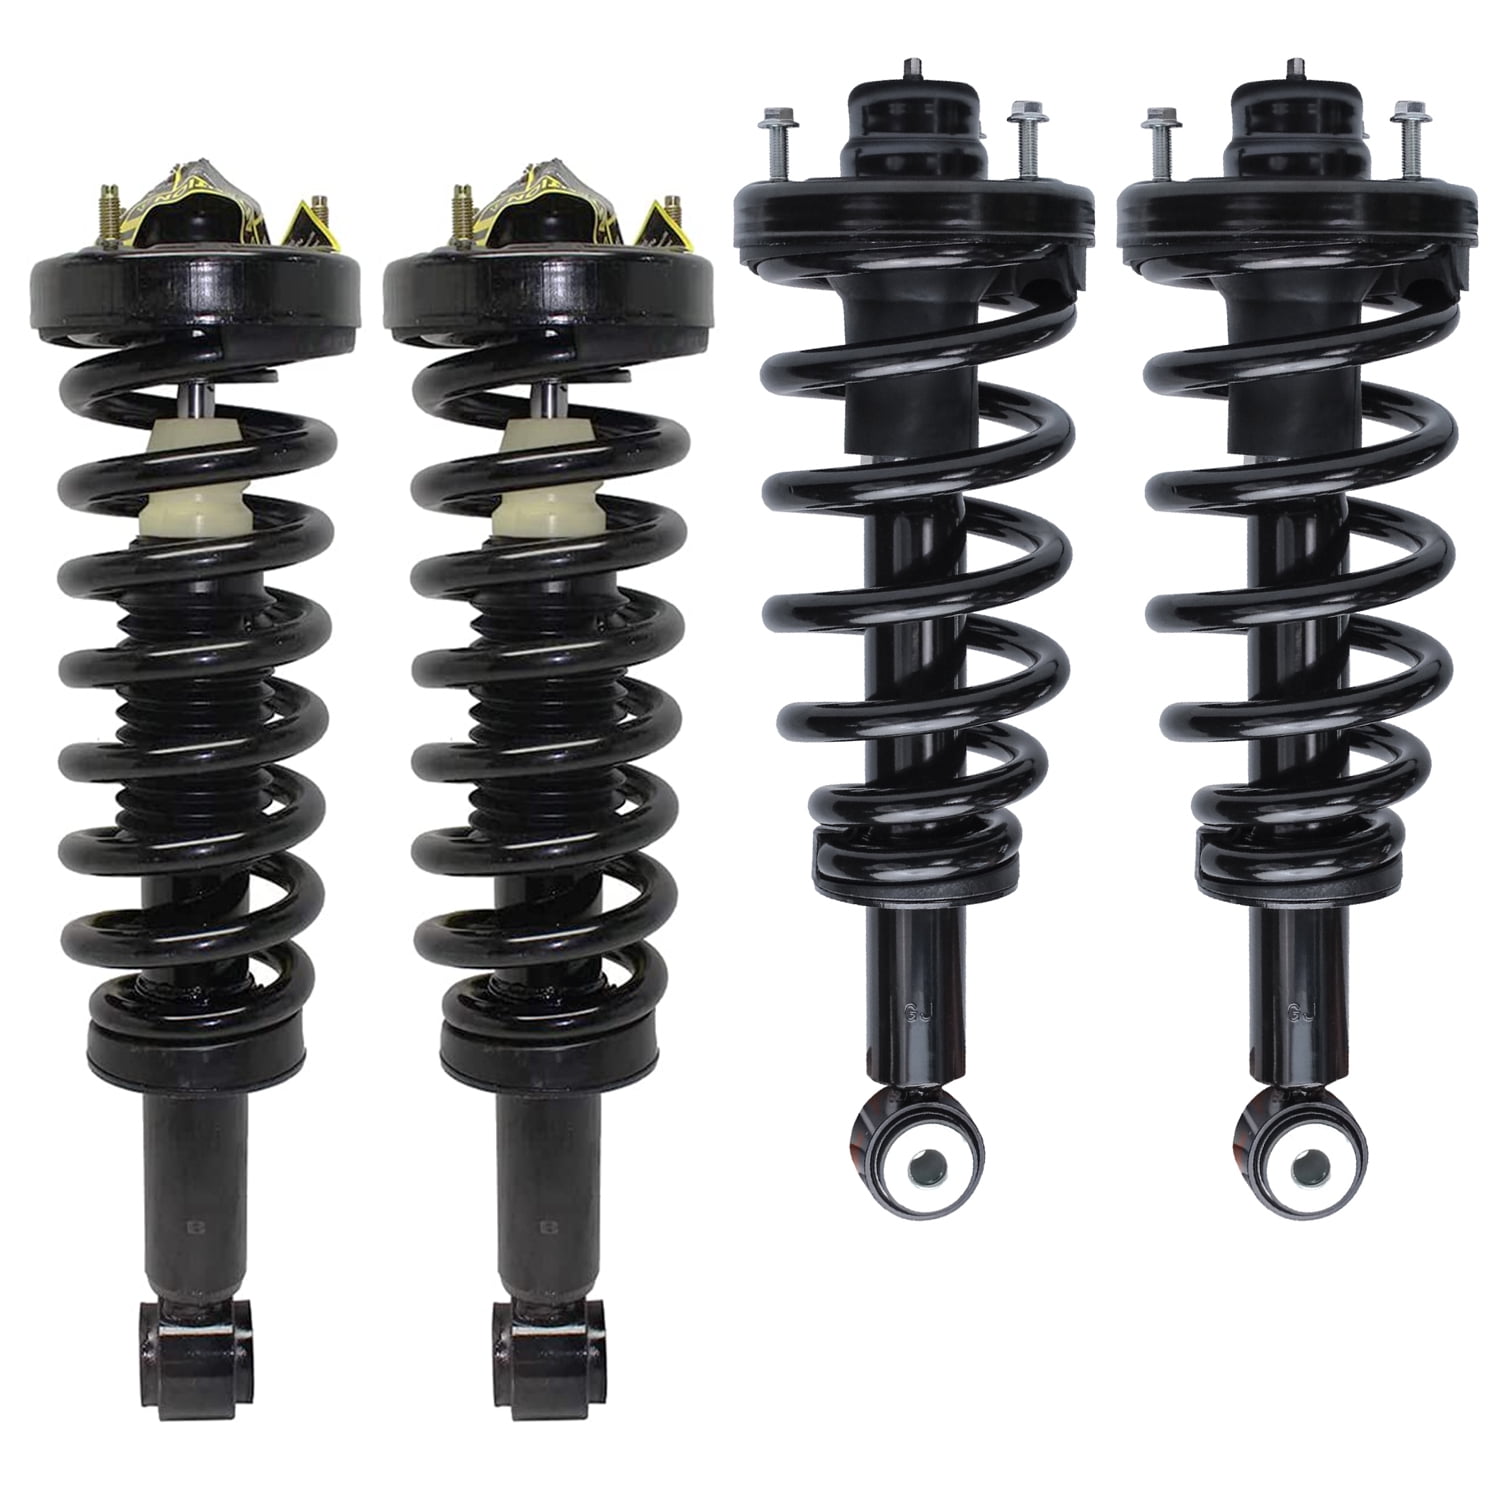 2x Premium Shocks Rear Suspension Strut Coil Spring Assembly For Ford Expedition